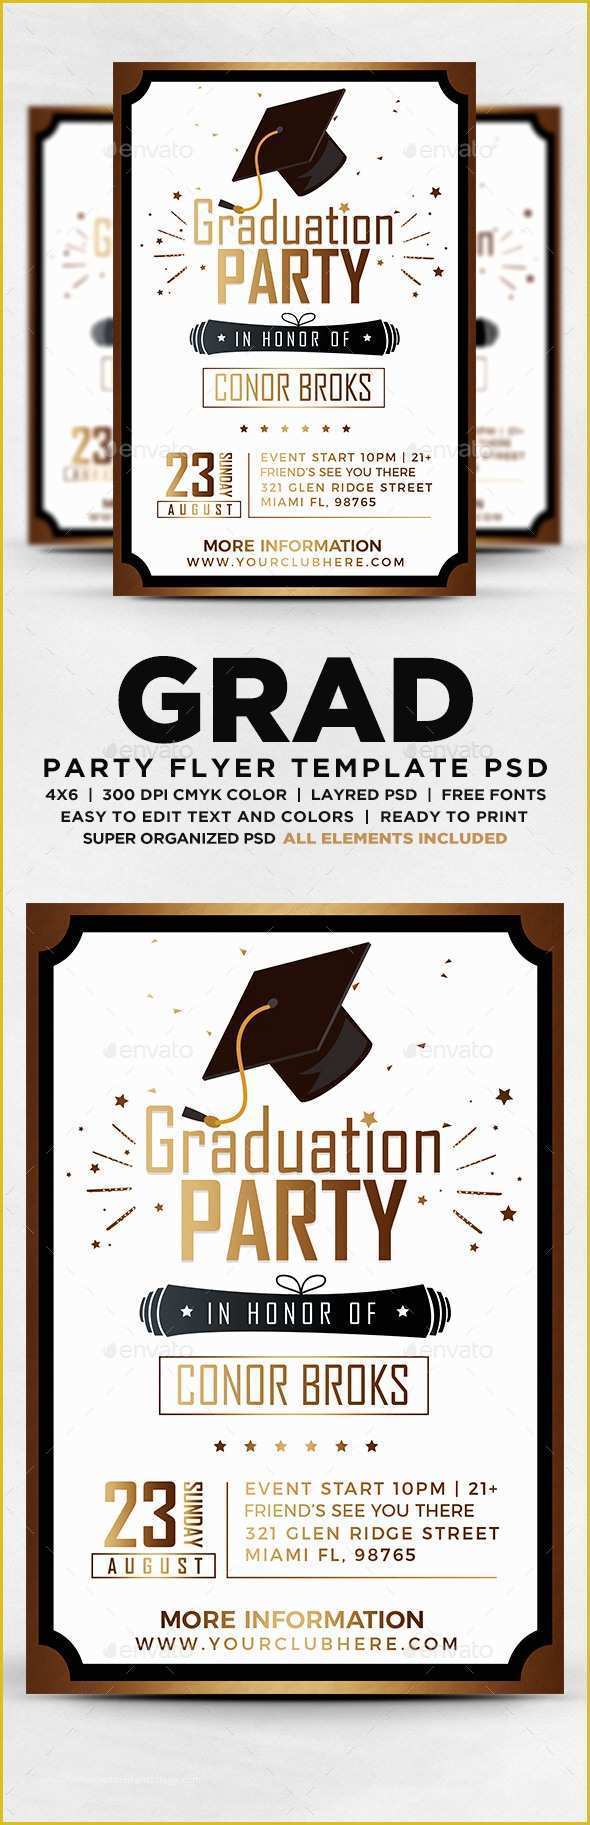 Graduation Party Flyer Template Free Of Graduation Party Flyer by Designblend